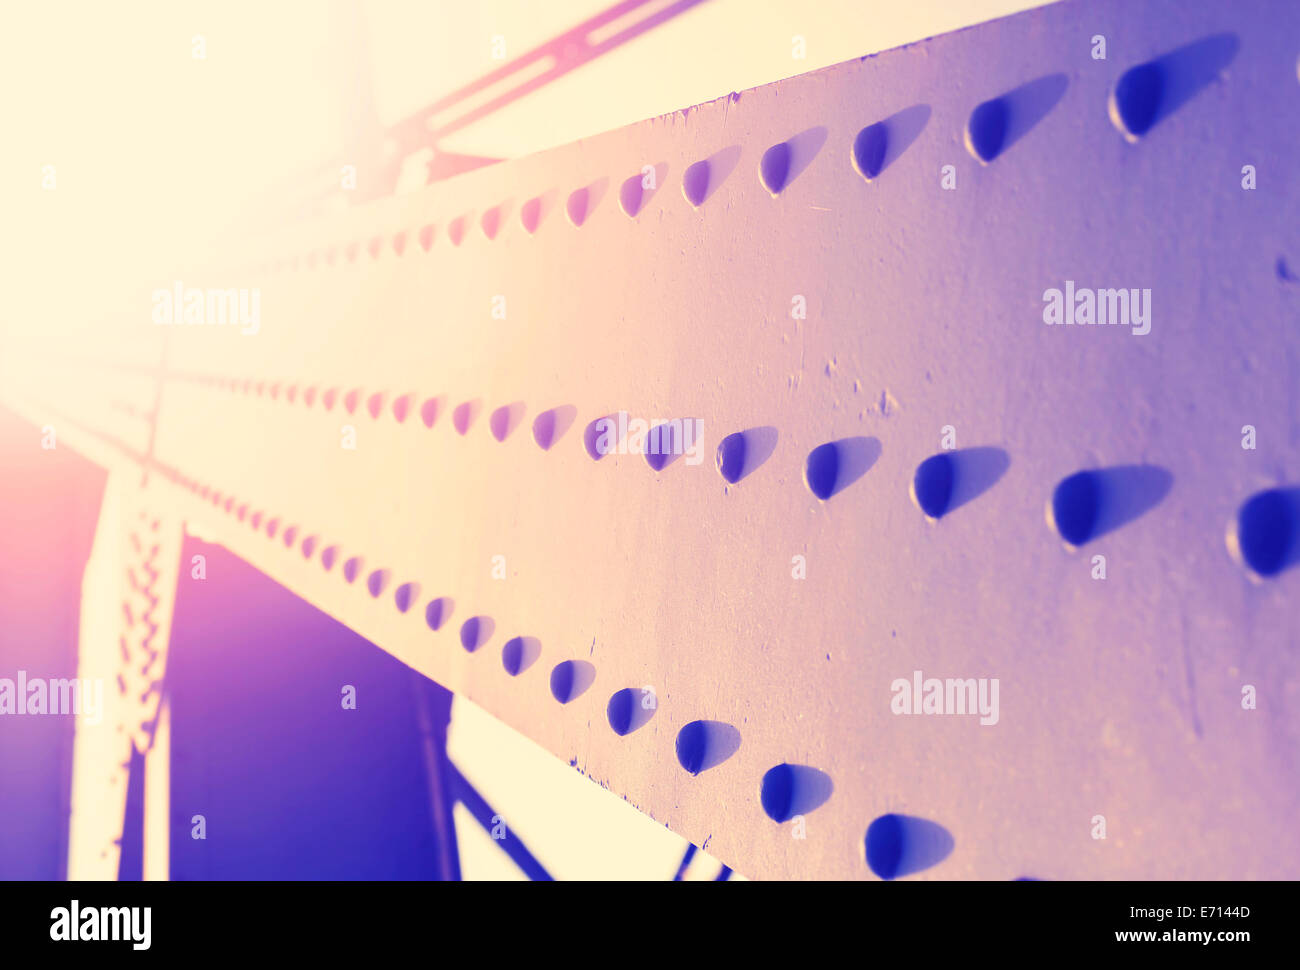 Vintage colorful abstract background of steel construction with rivets, shallow depth of field. Stock Photo